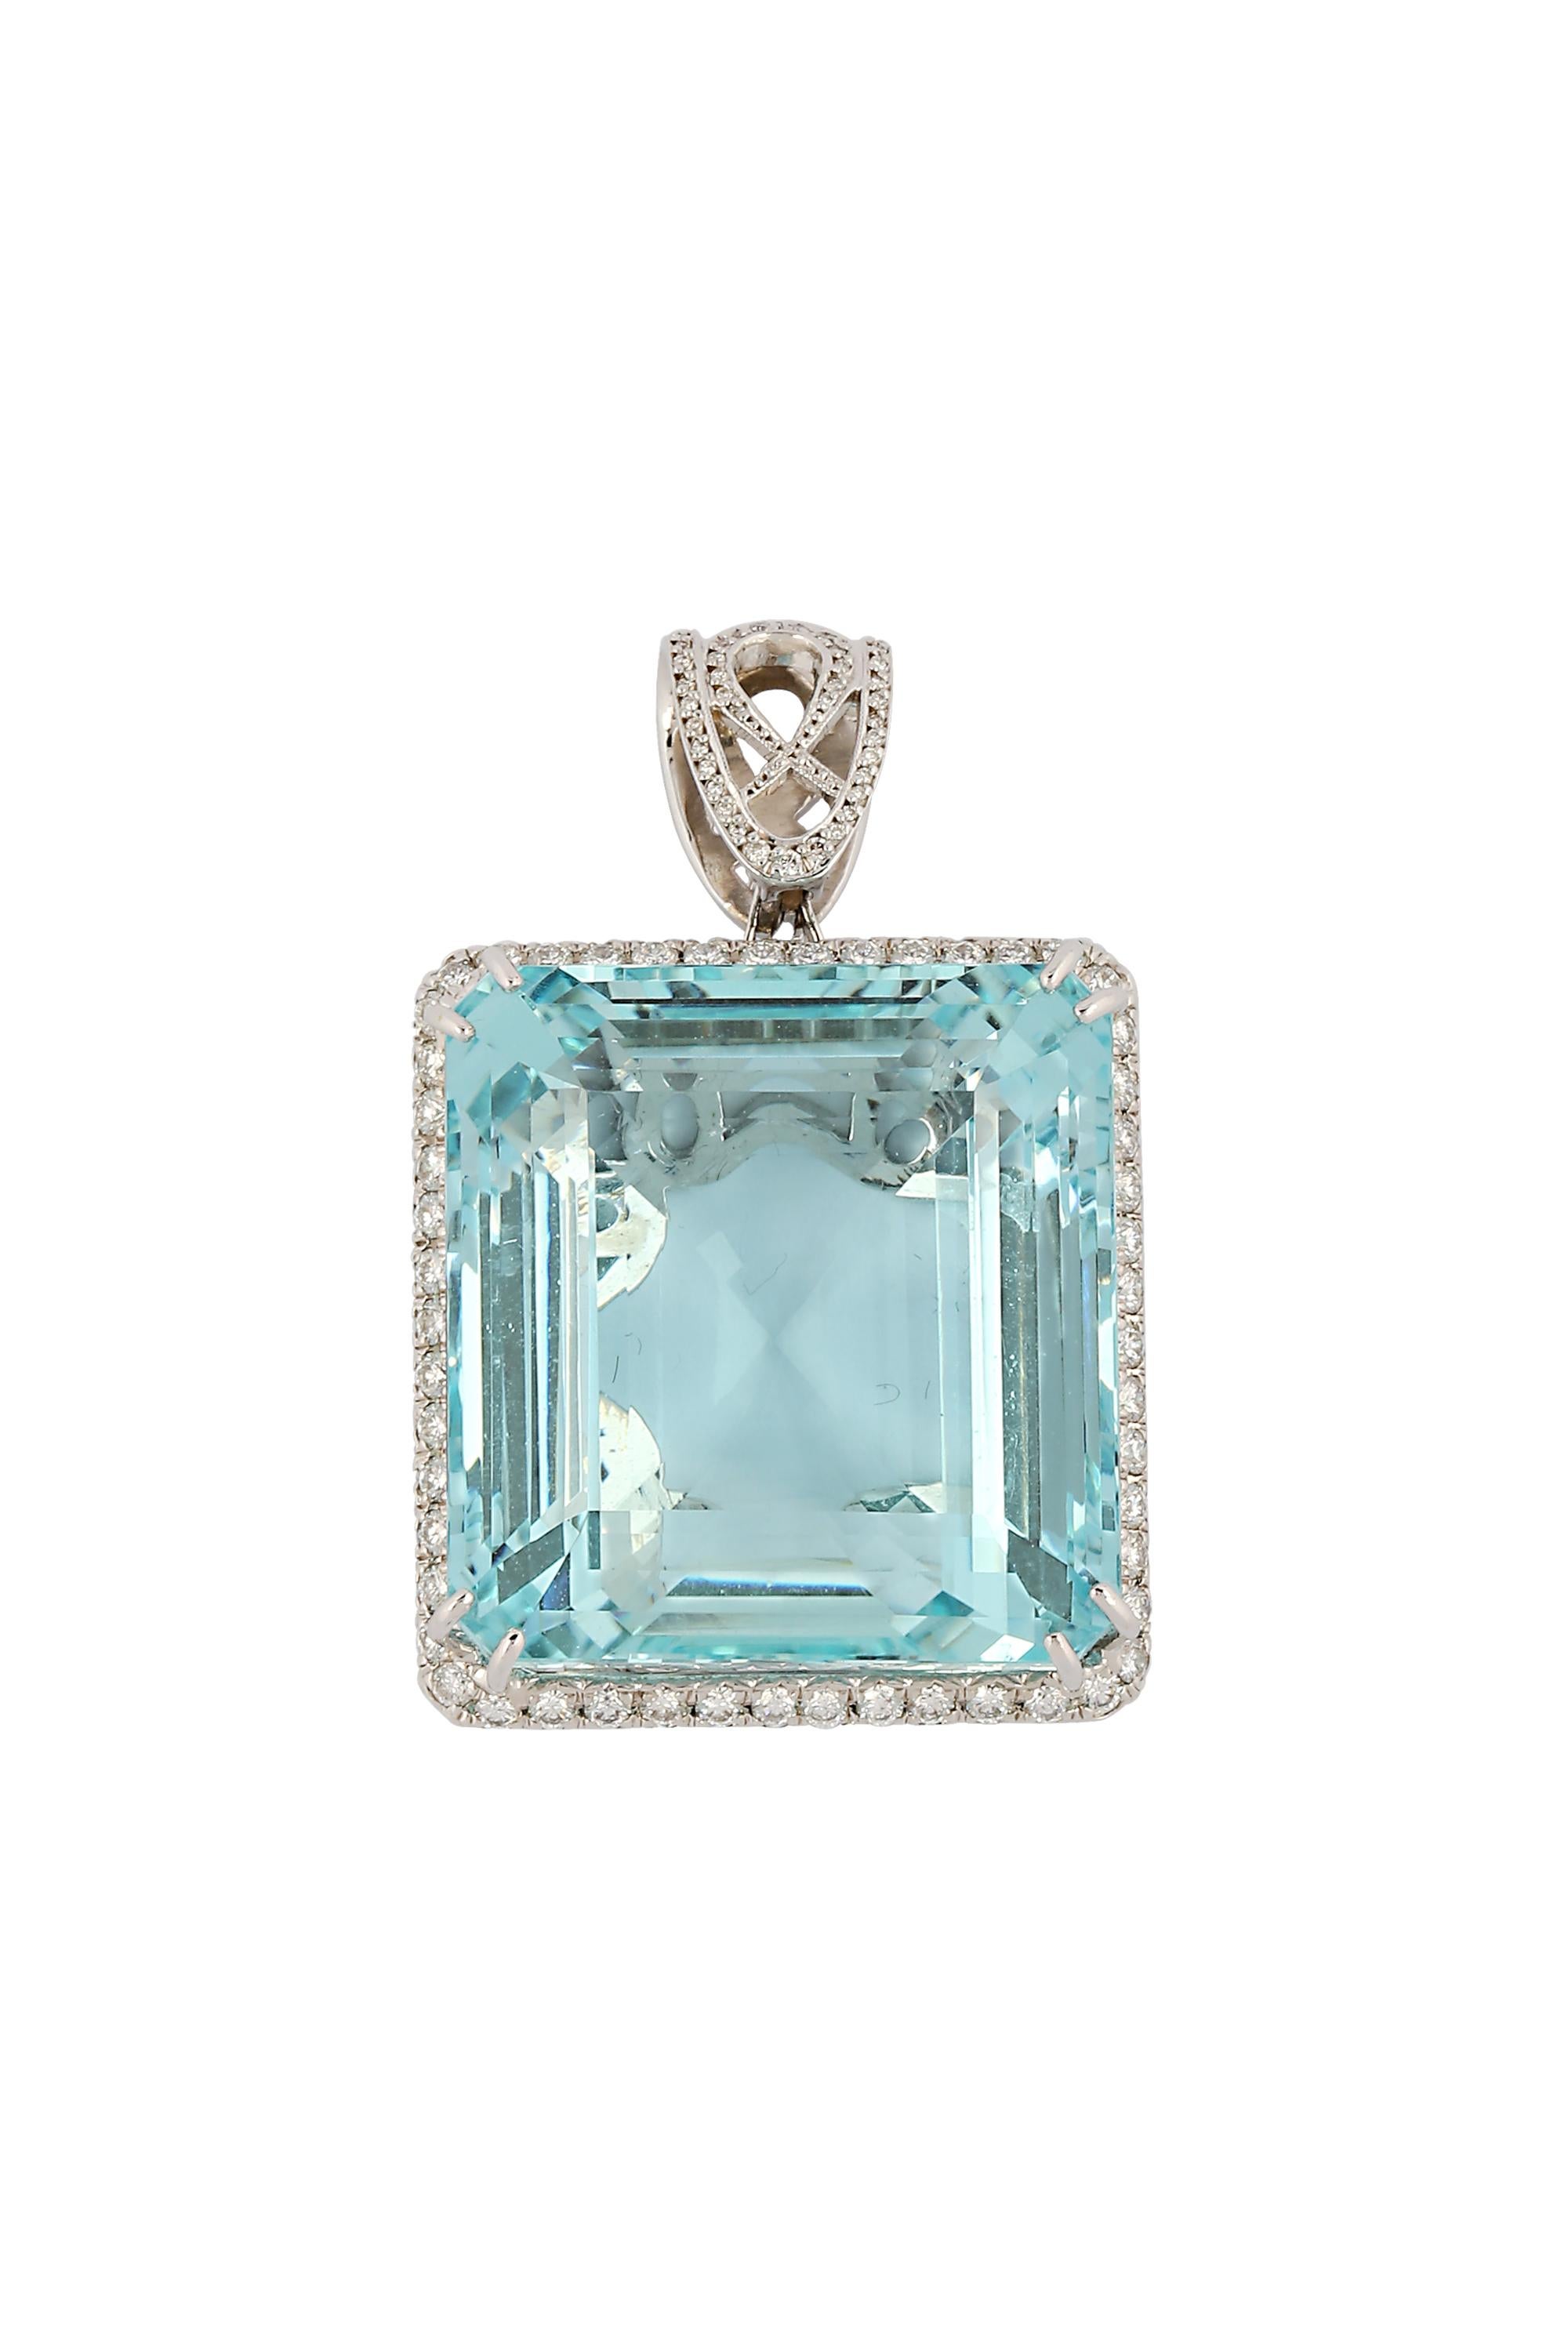 A rare and deep blue aquamarine is the stunning center of this beautifully crafted pendant. This exceptional stone, weighing approximately 130 carats, is unusually clean for its size. The aquamarine is enhanced by a frame of glittering pave diamonds